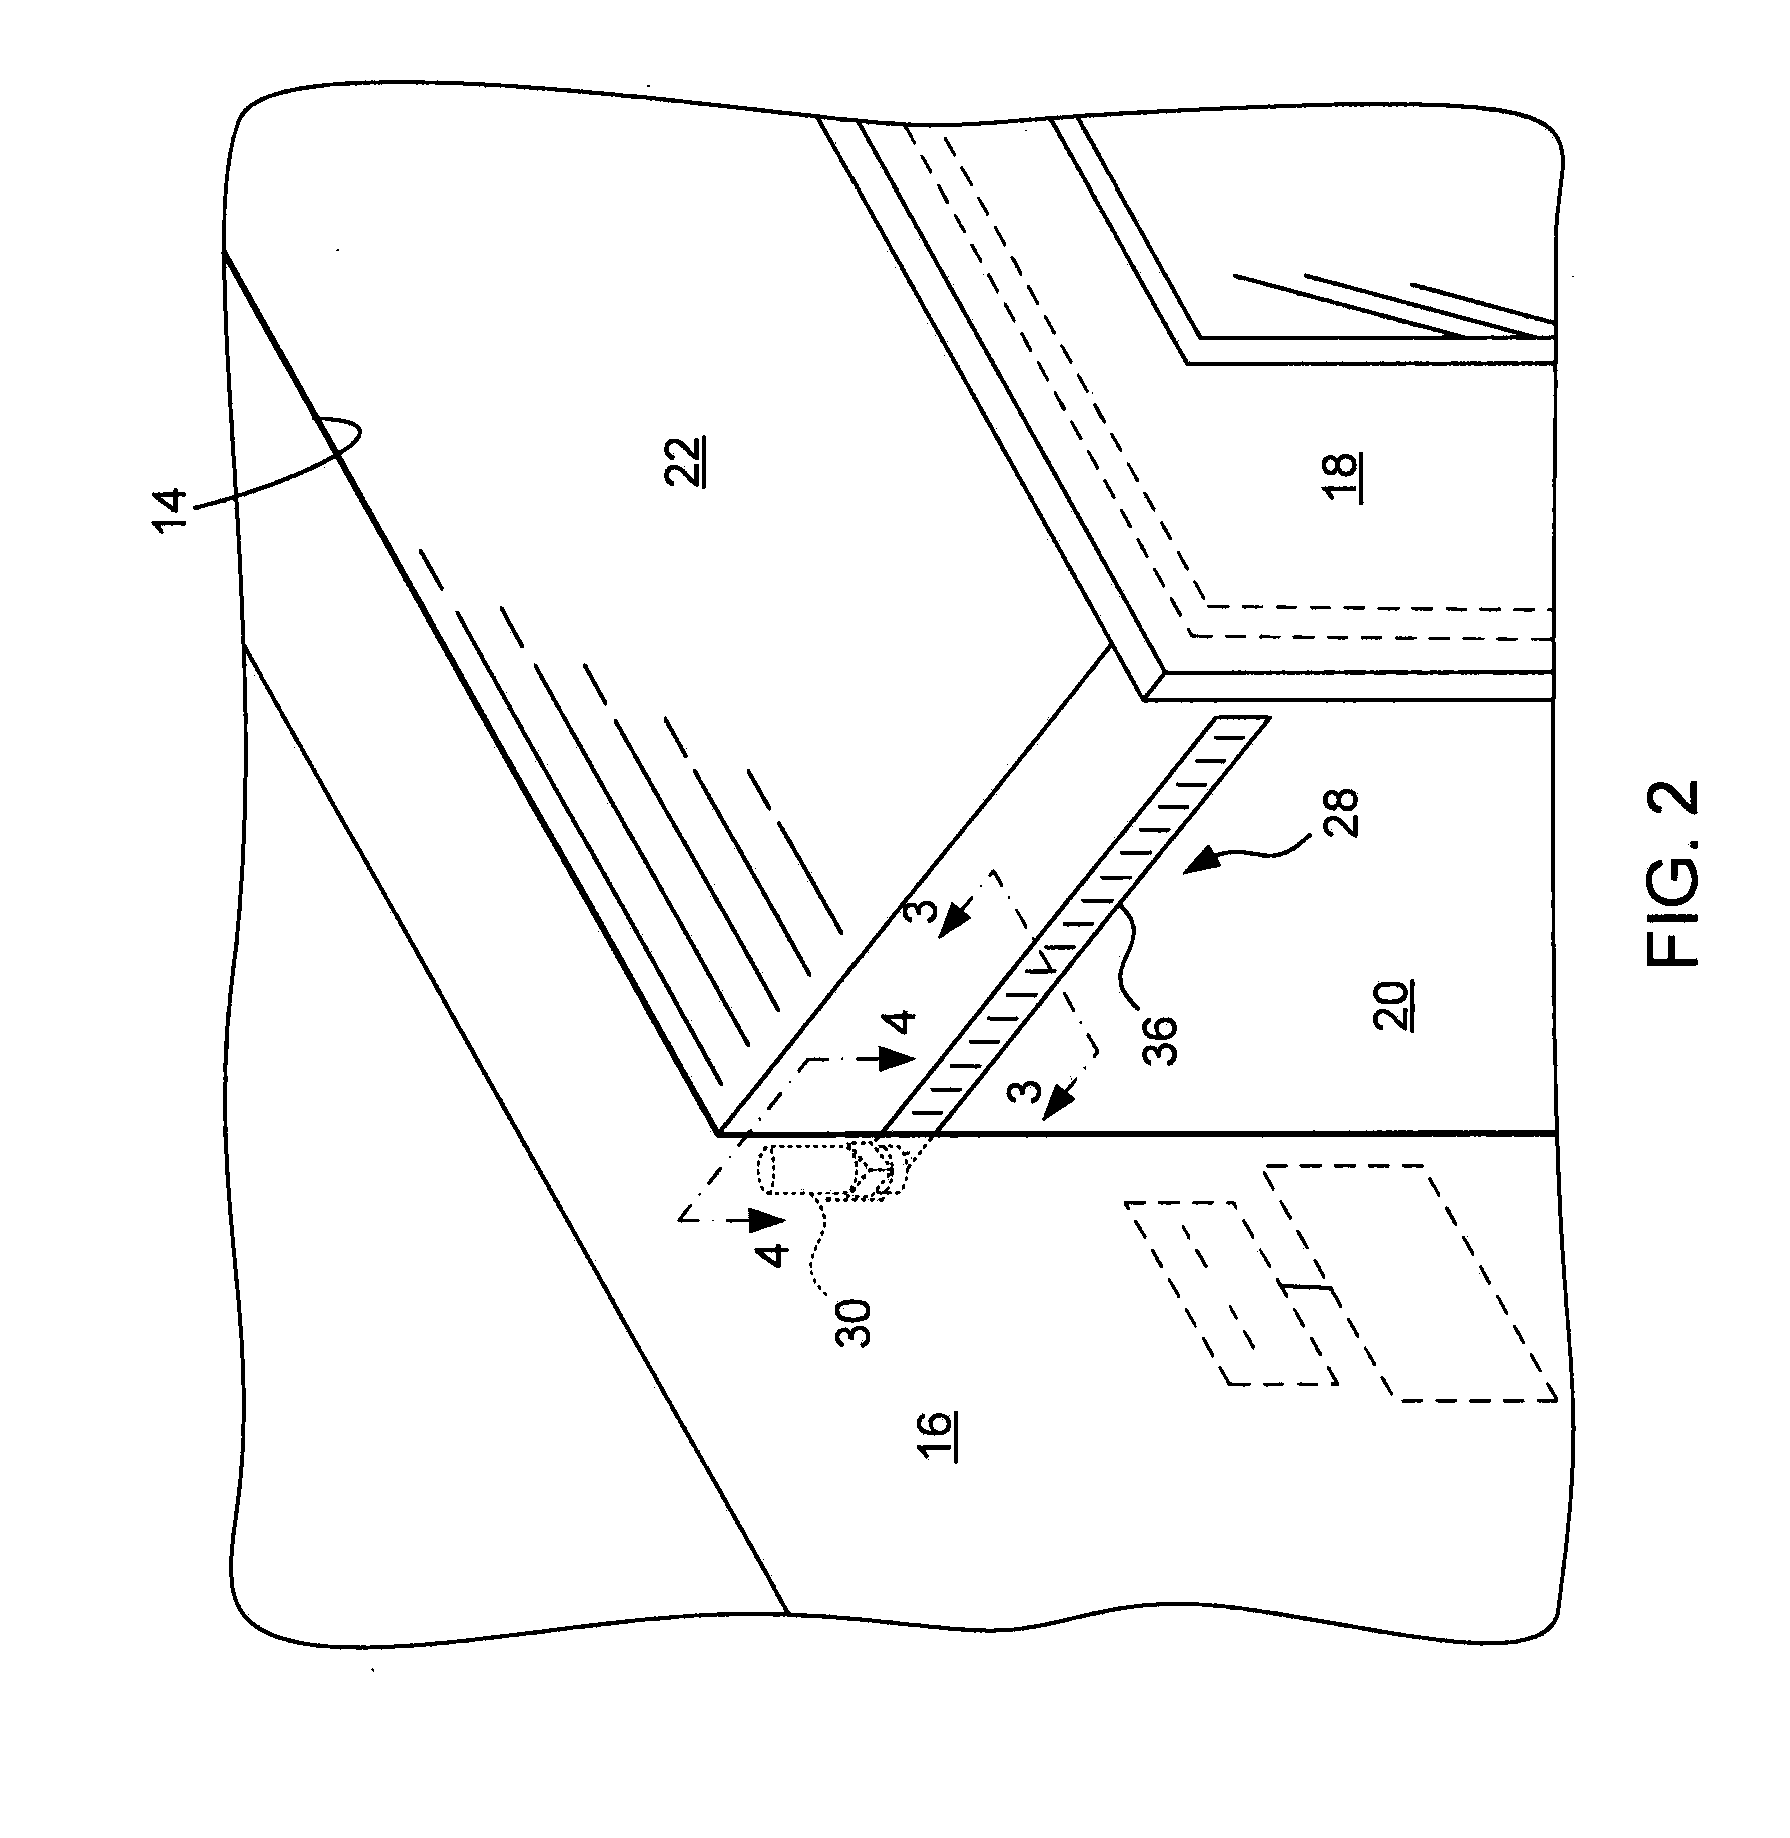 Wall Movement Synchronization Slide-Out Room System and Method